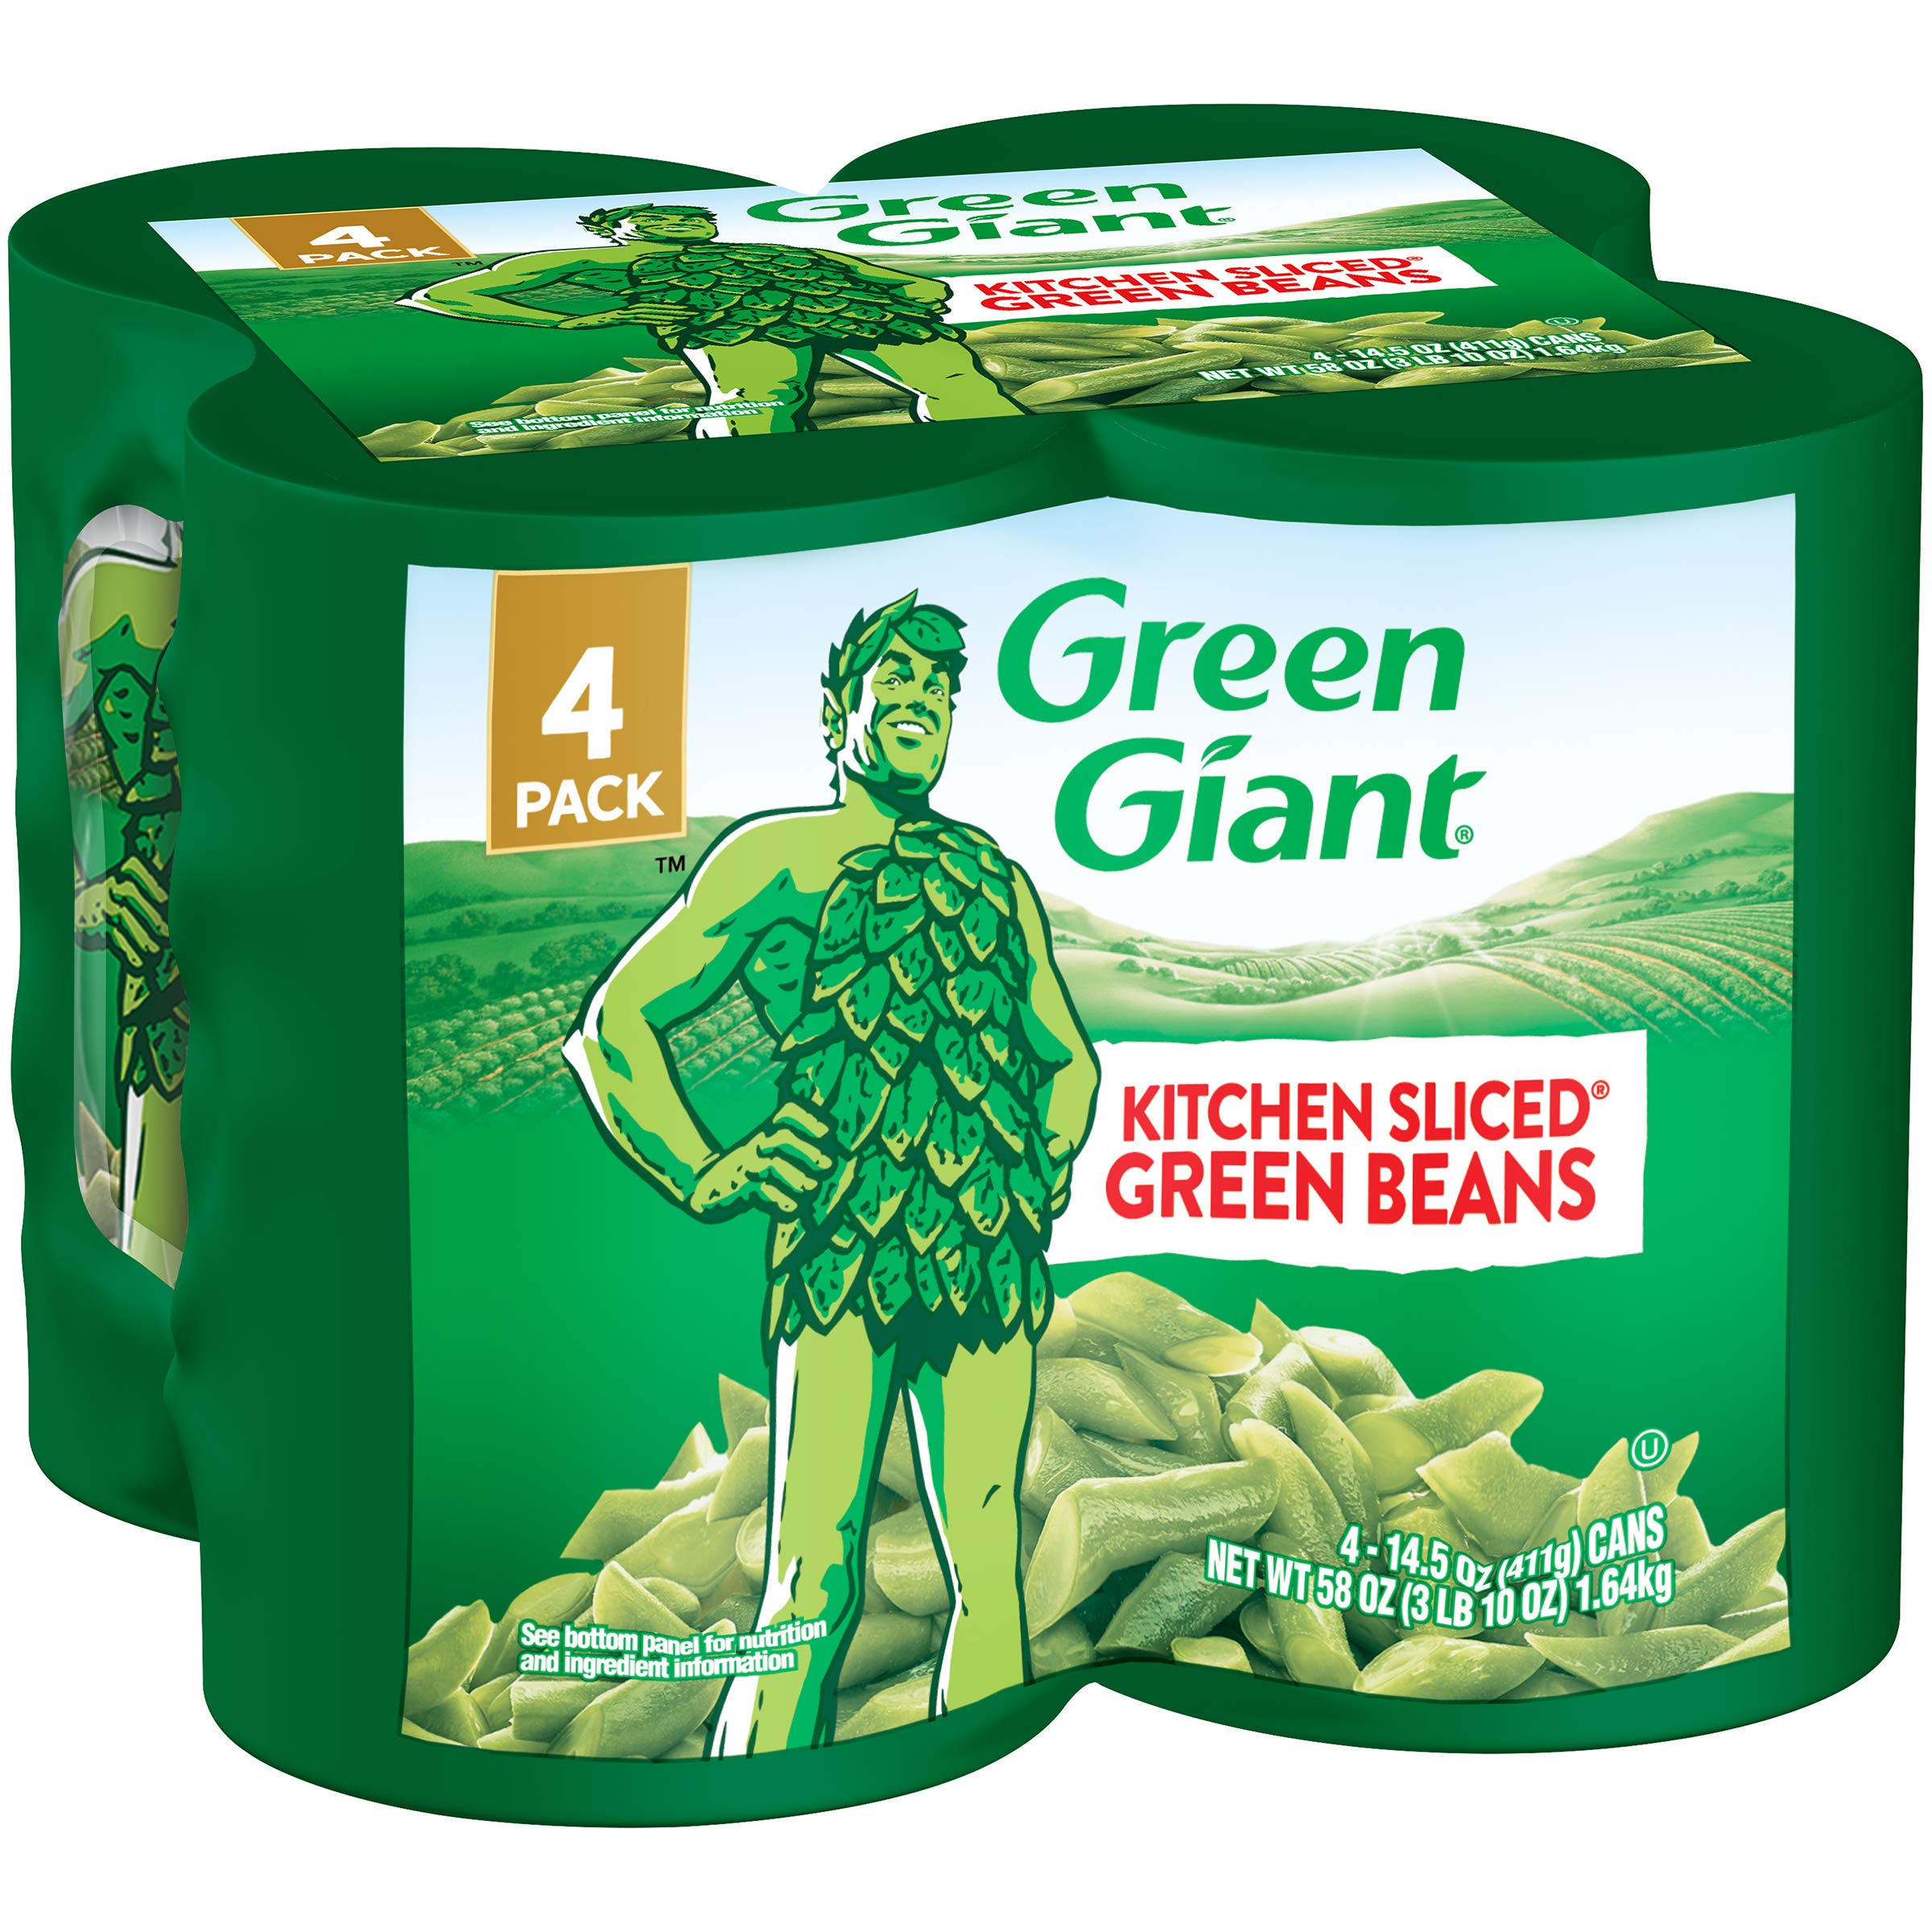 4-Pack 14.5-Oz Green Giant Kitchen Sliced Green Beans $2.60 ($0.65 each) w/ S&S + Free Shipping w/ Prime or on $35+